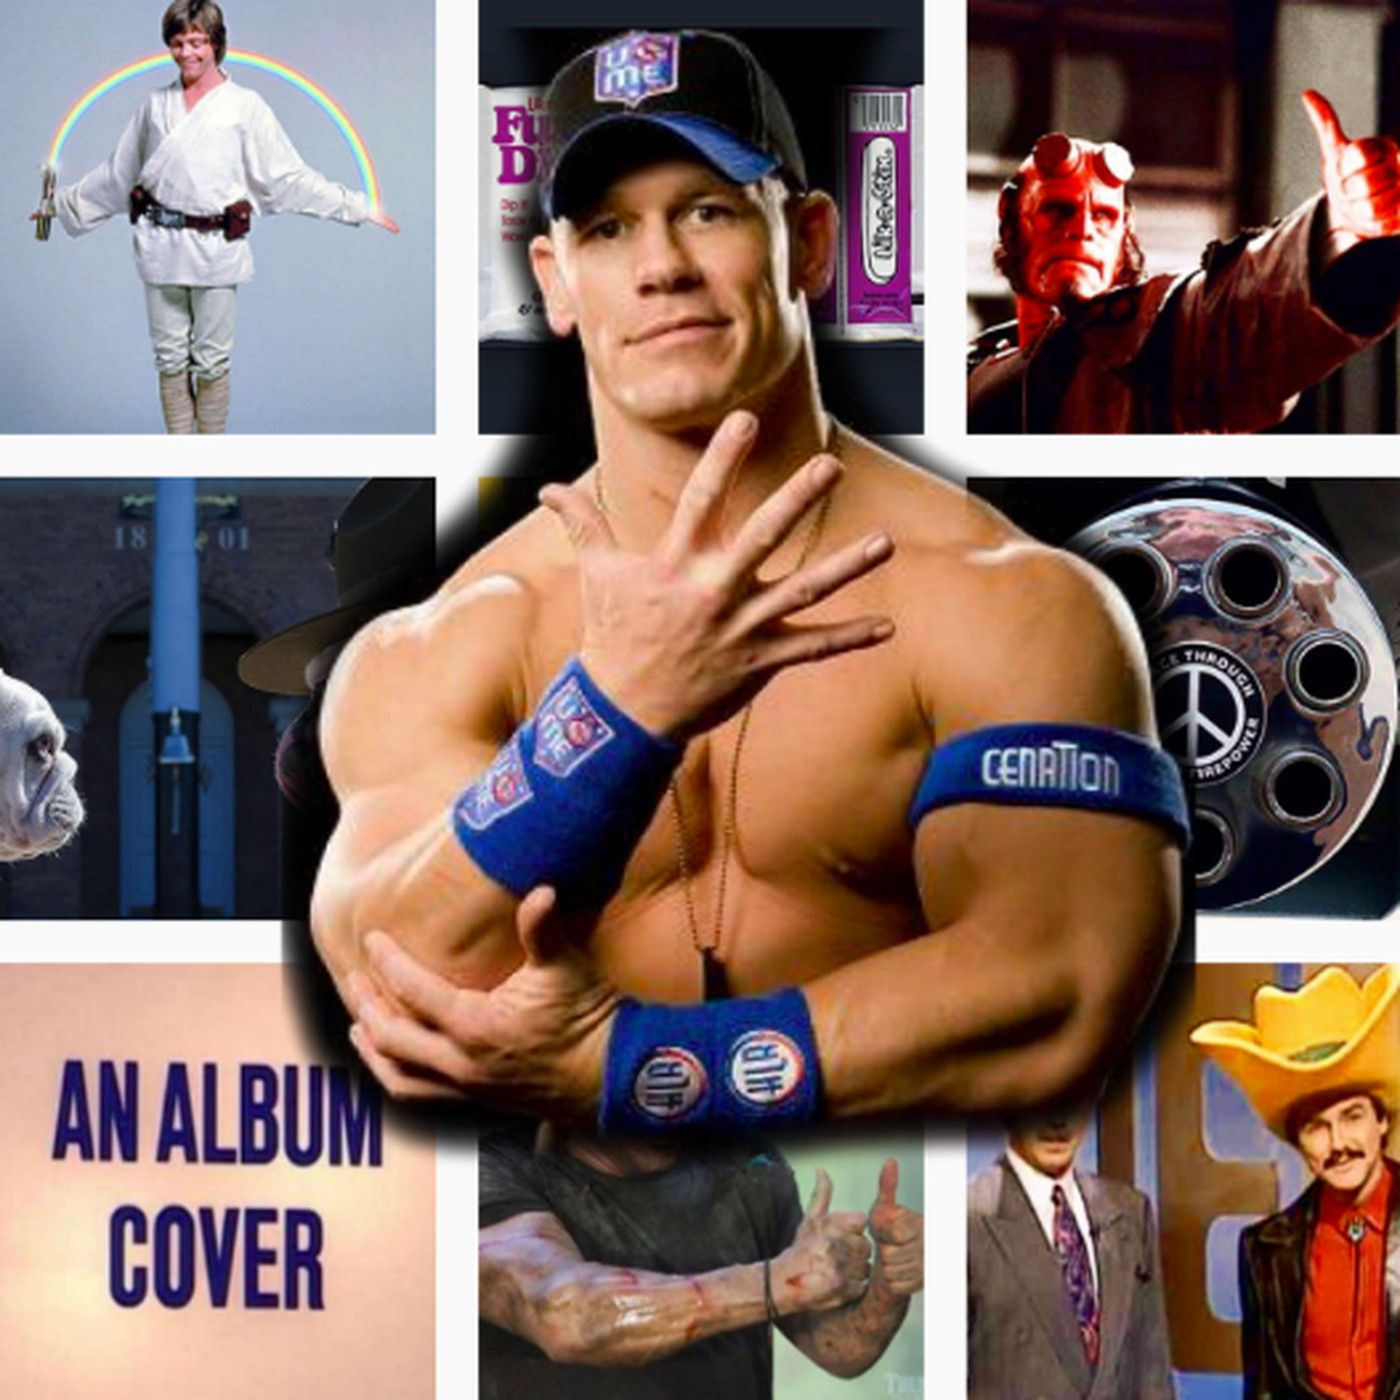 It's about time we talked about John Cena's weird and wonderful